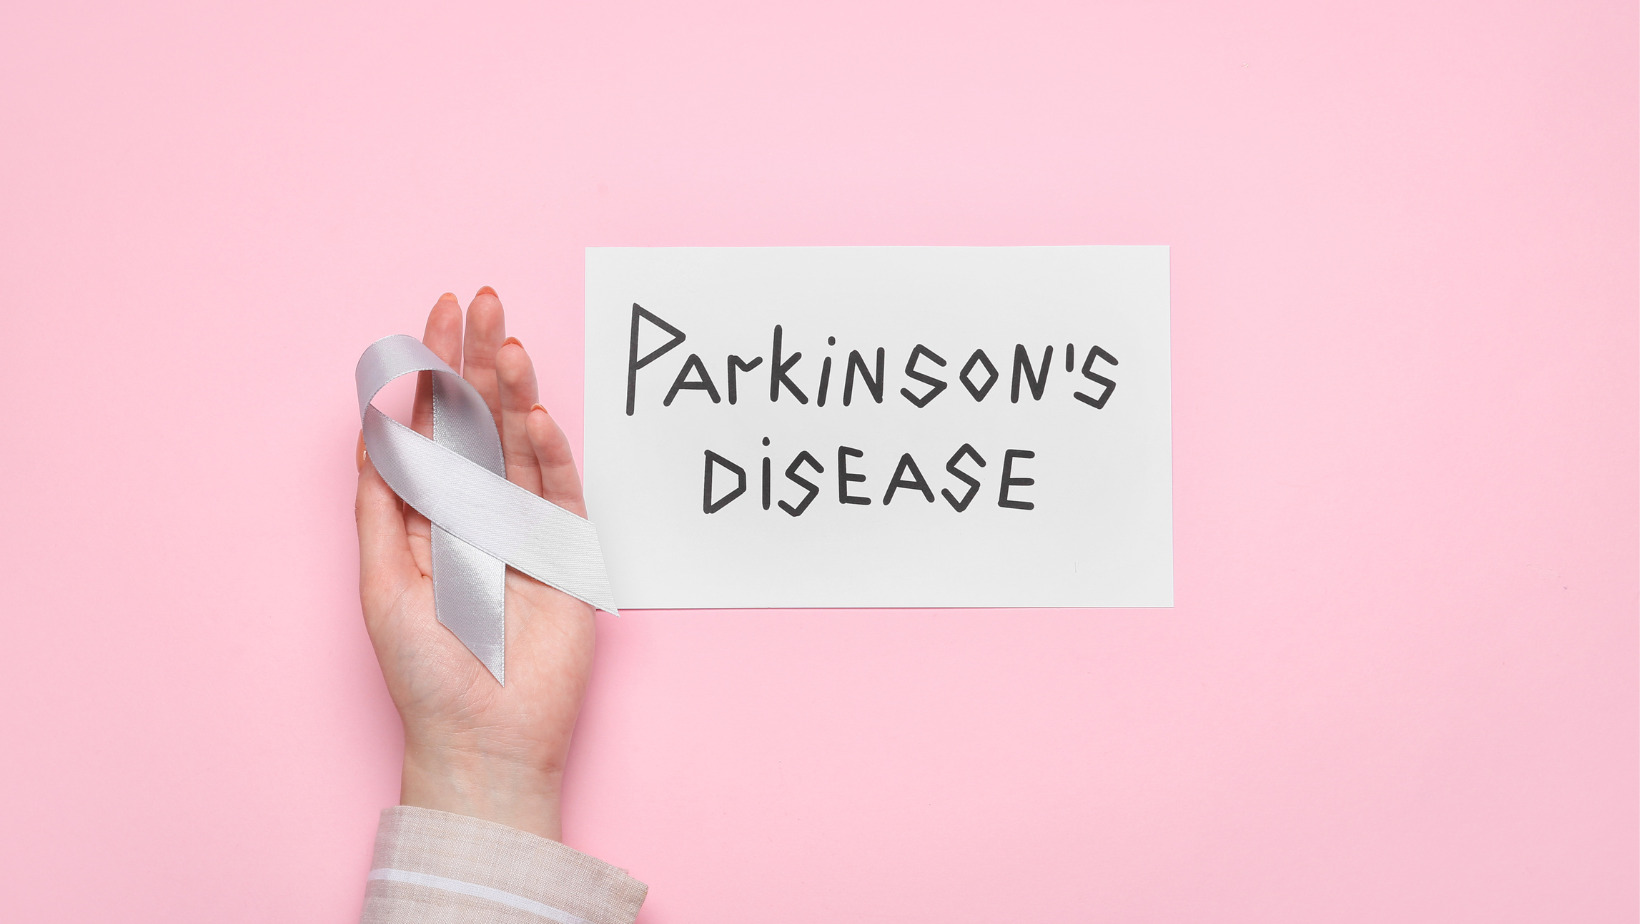 Can early detection stop Parkinson's disease progression?